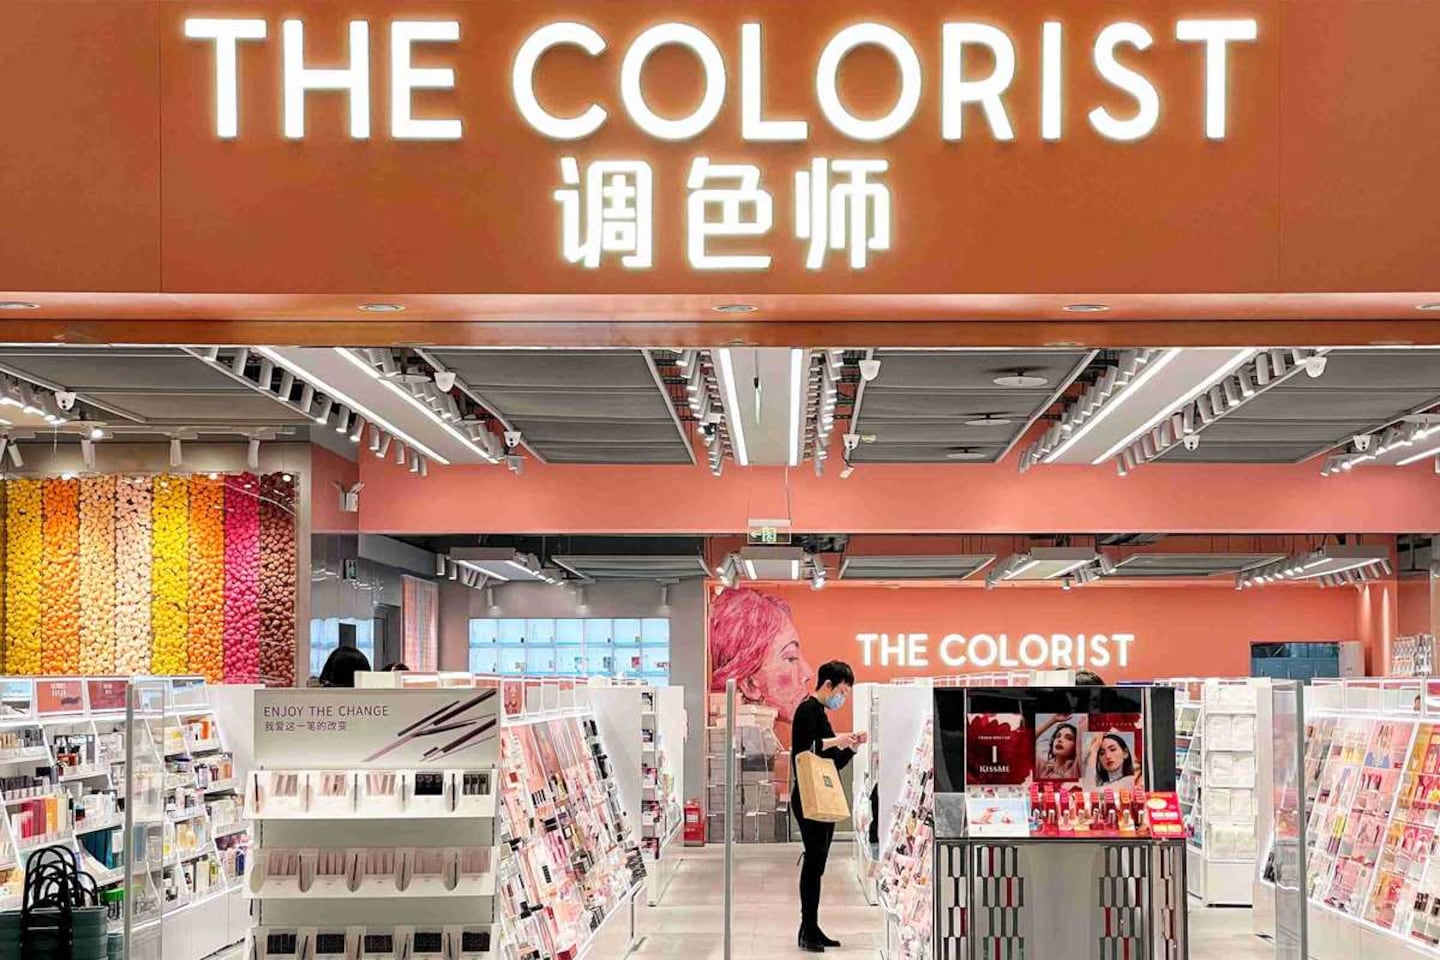 The exterior of a The Colorist store. The Colorist